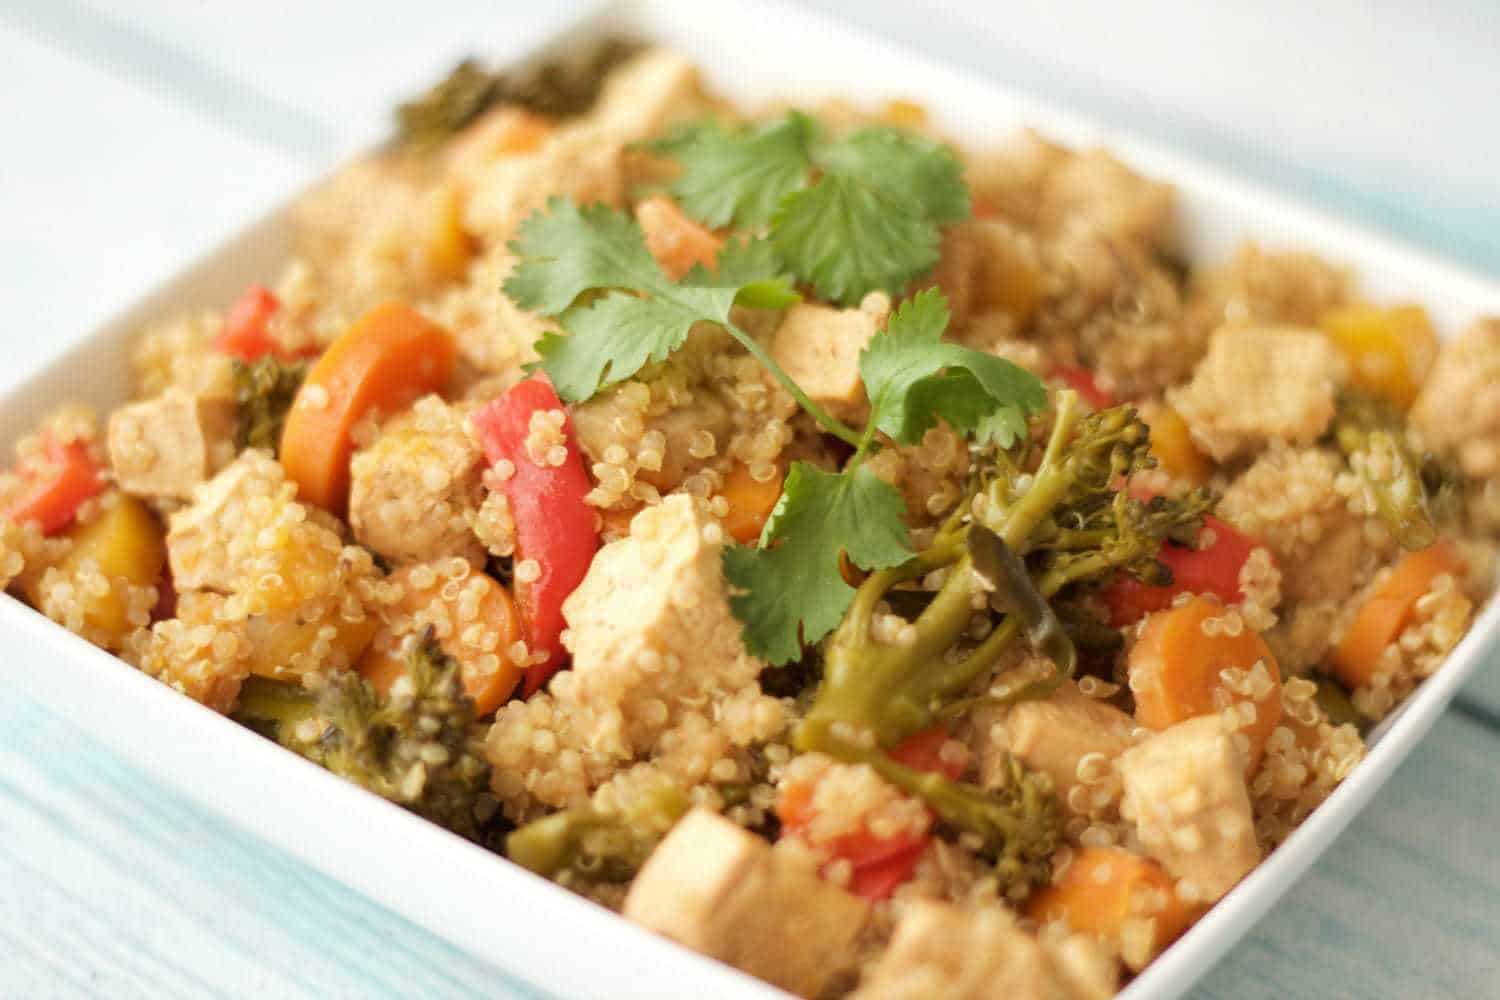 Baked Tofu and Vegetable Casserole with Quinoa